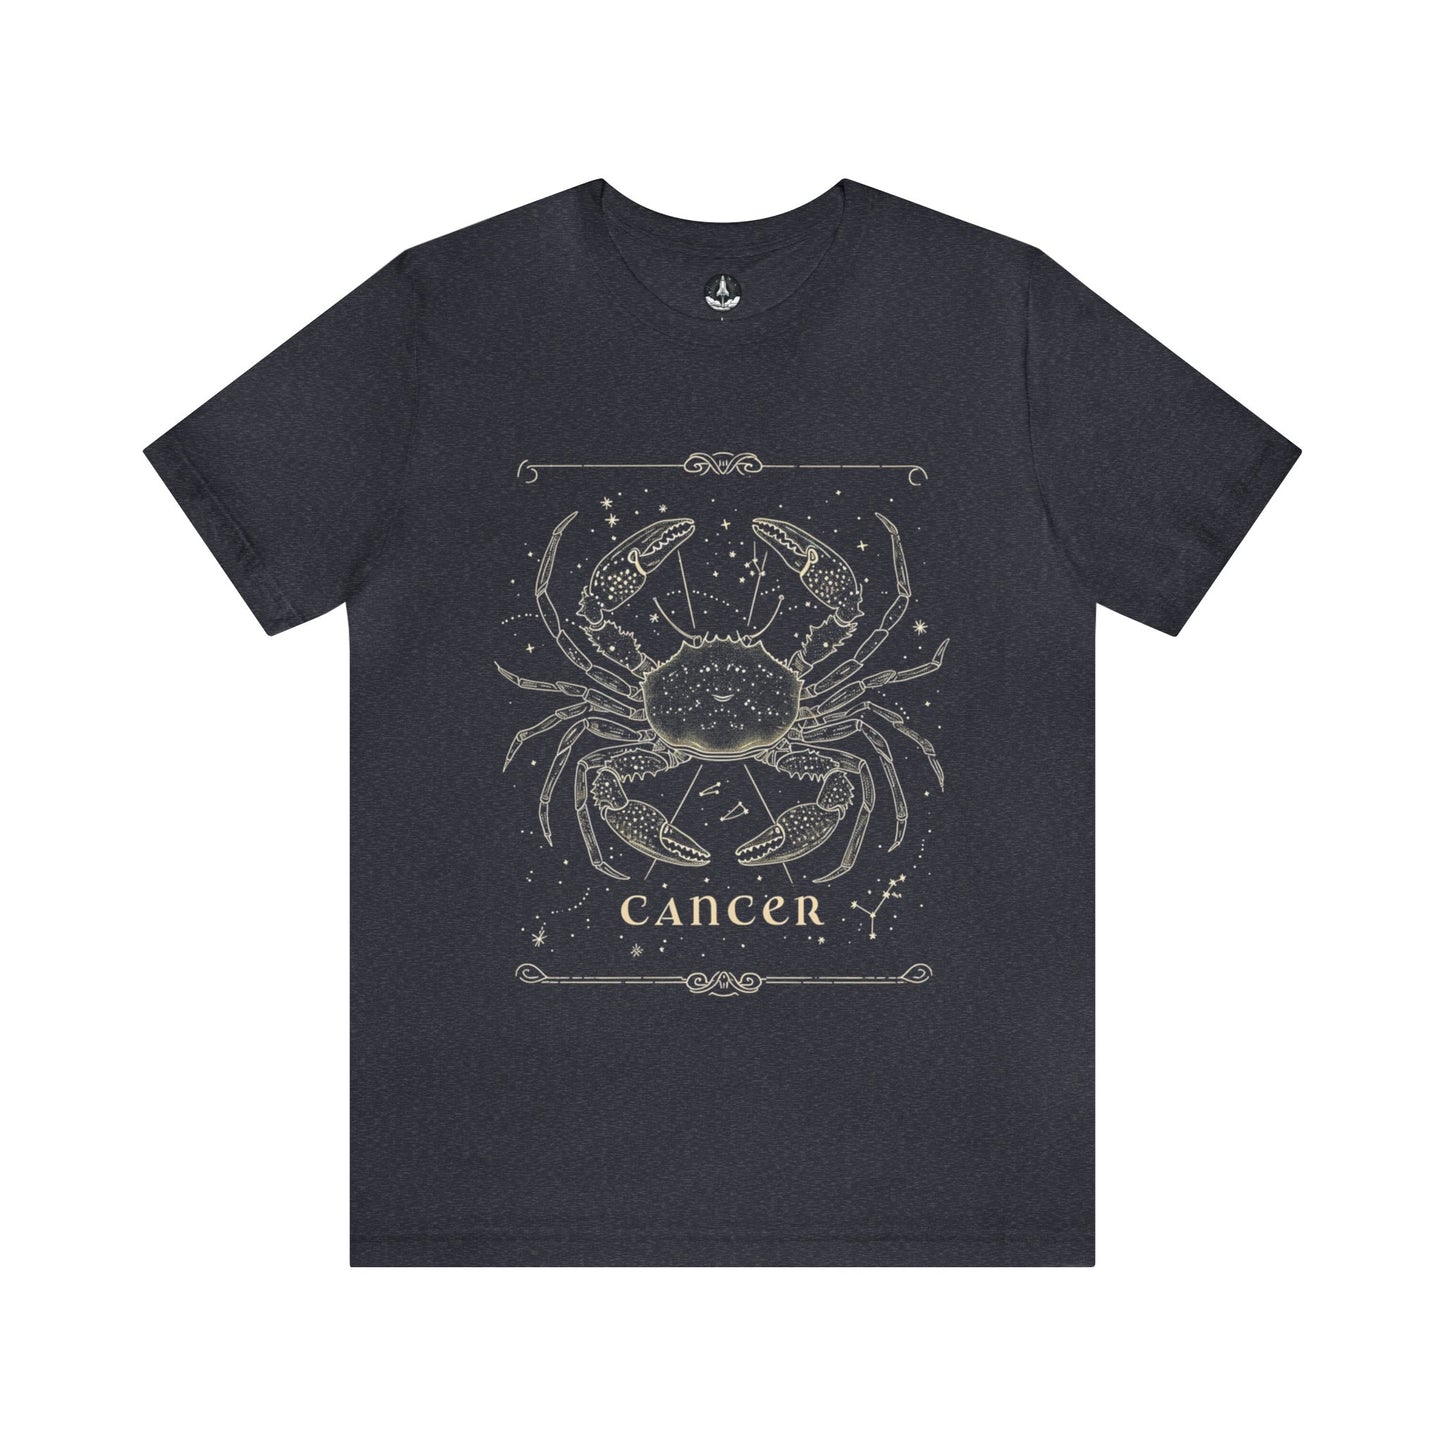 Cancer’s Compassion T-Shirt